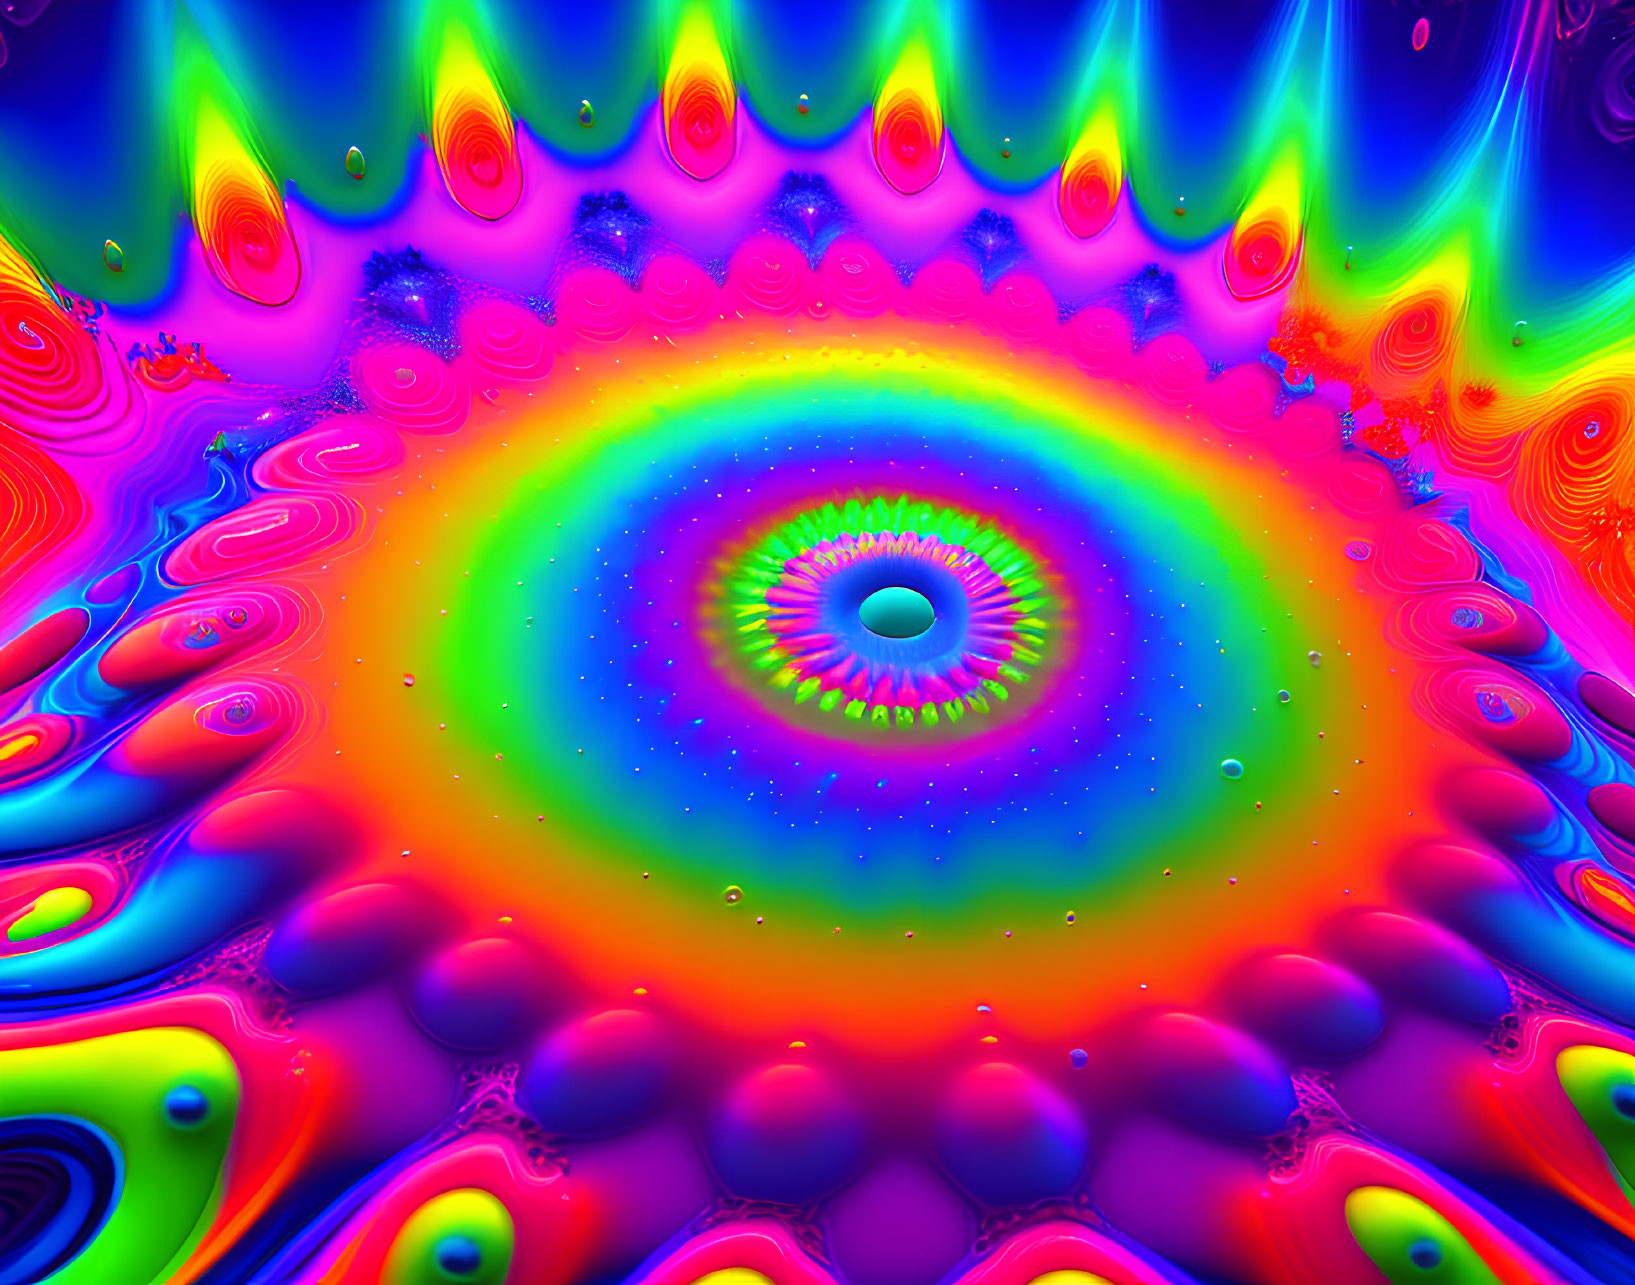 Colorful Fractal Image with Hypnotic Kaleidoscopic Effect